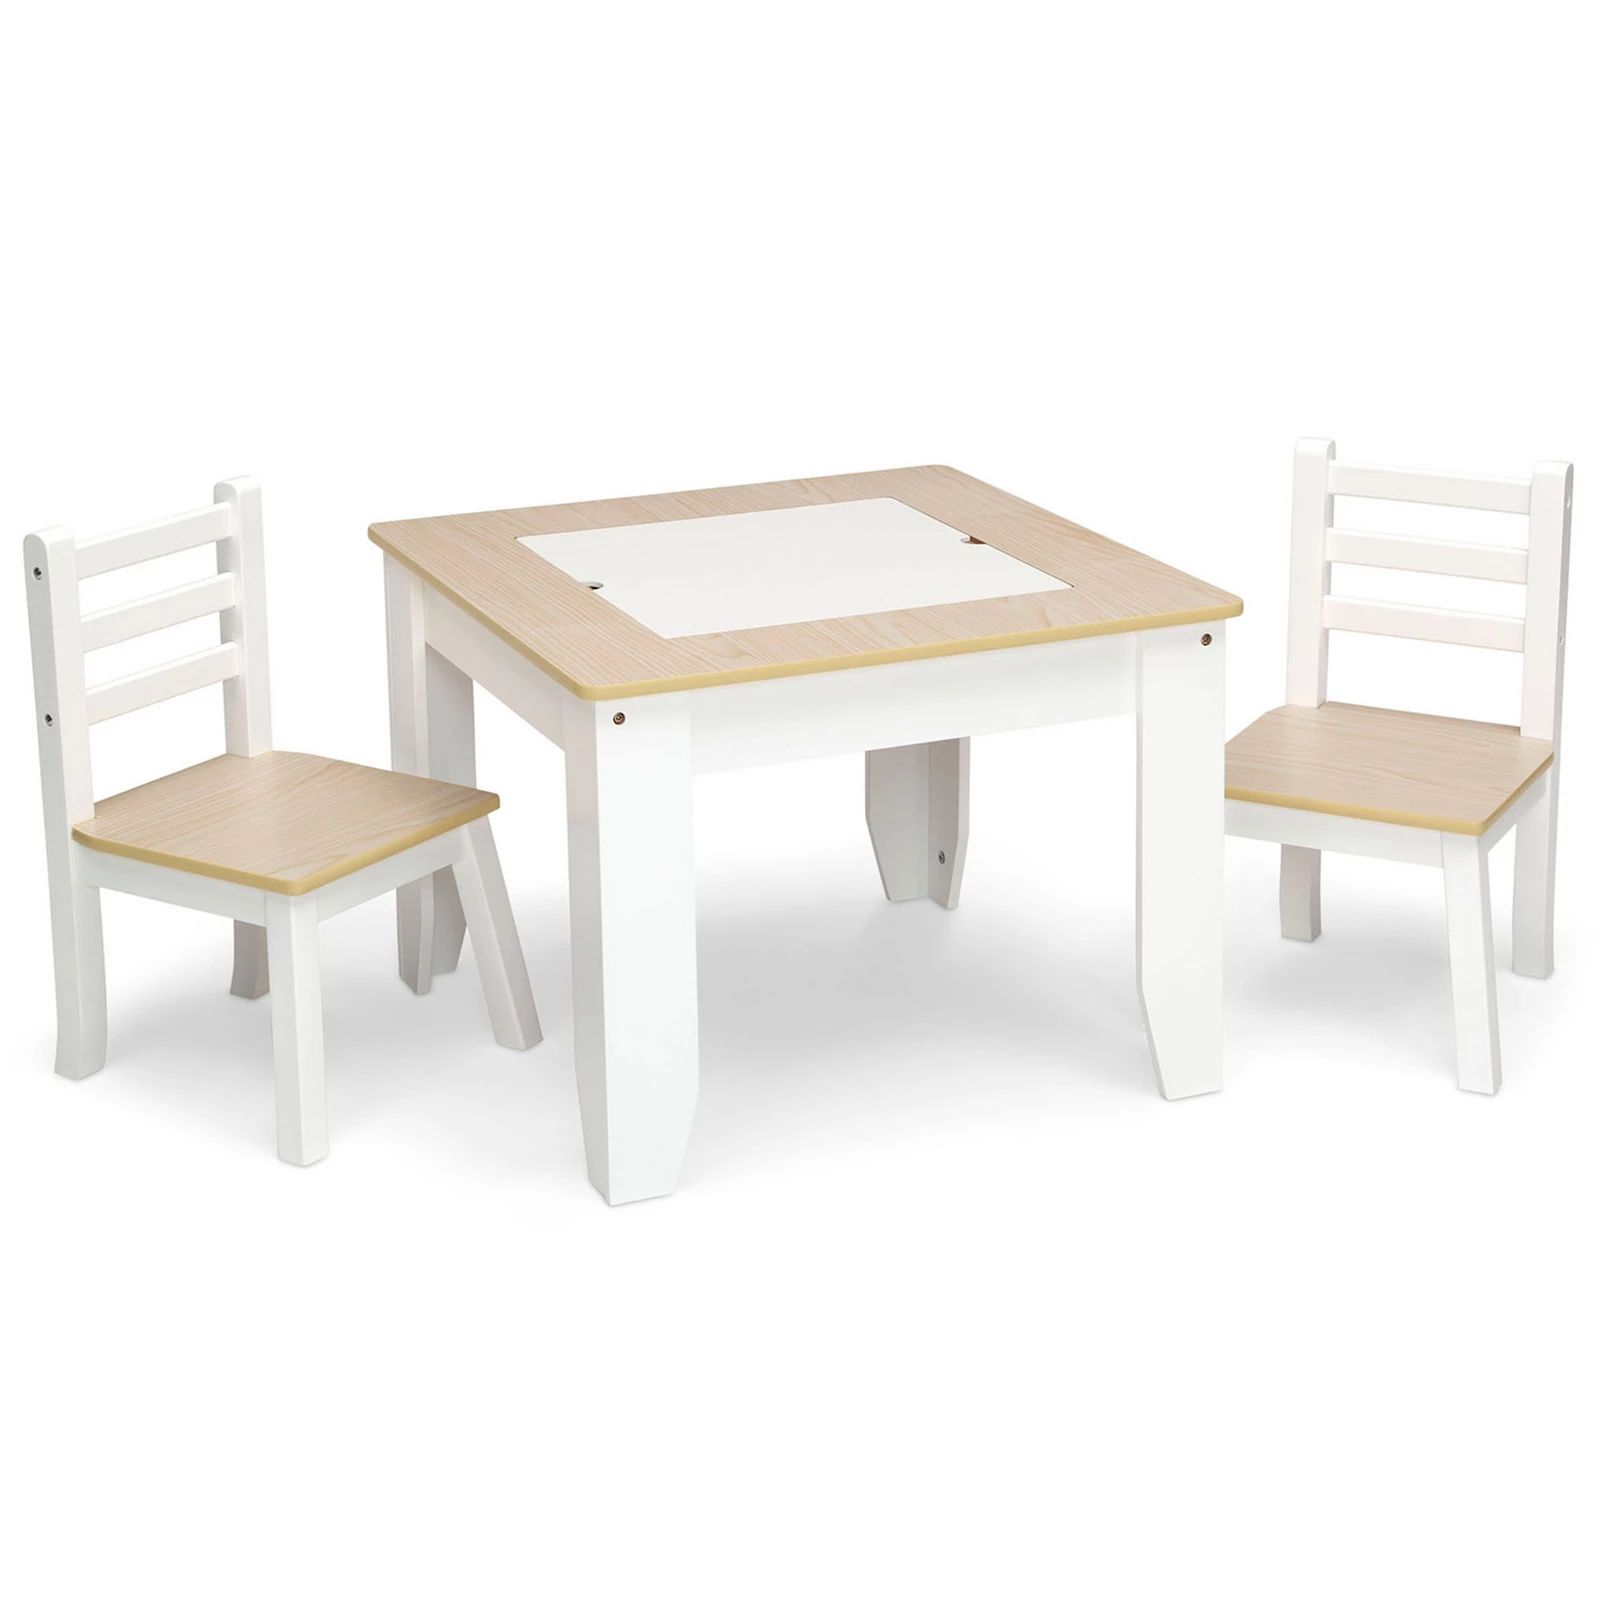 Delta Children Chelsea Table and Chairs Set, White | Kohl's